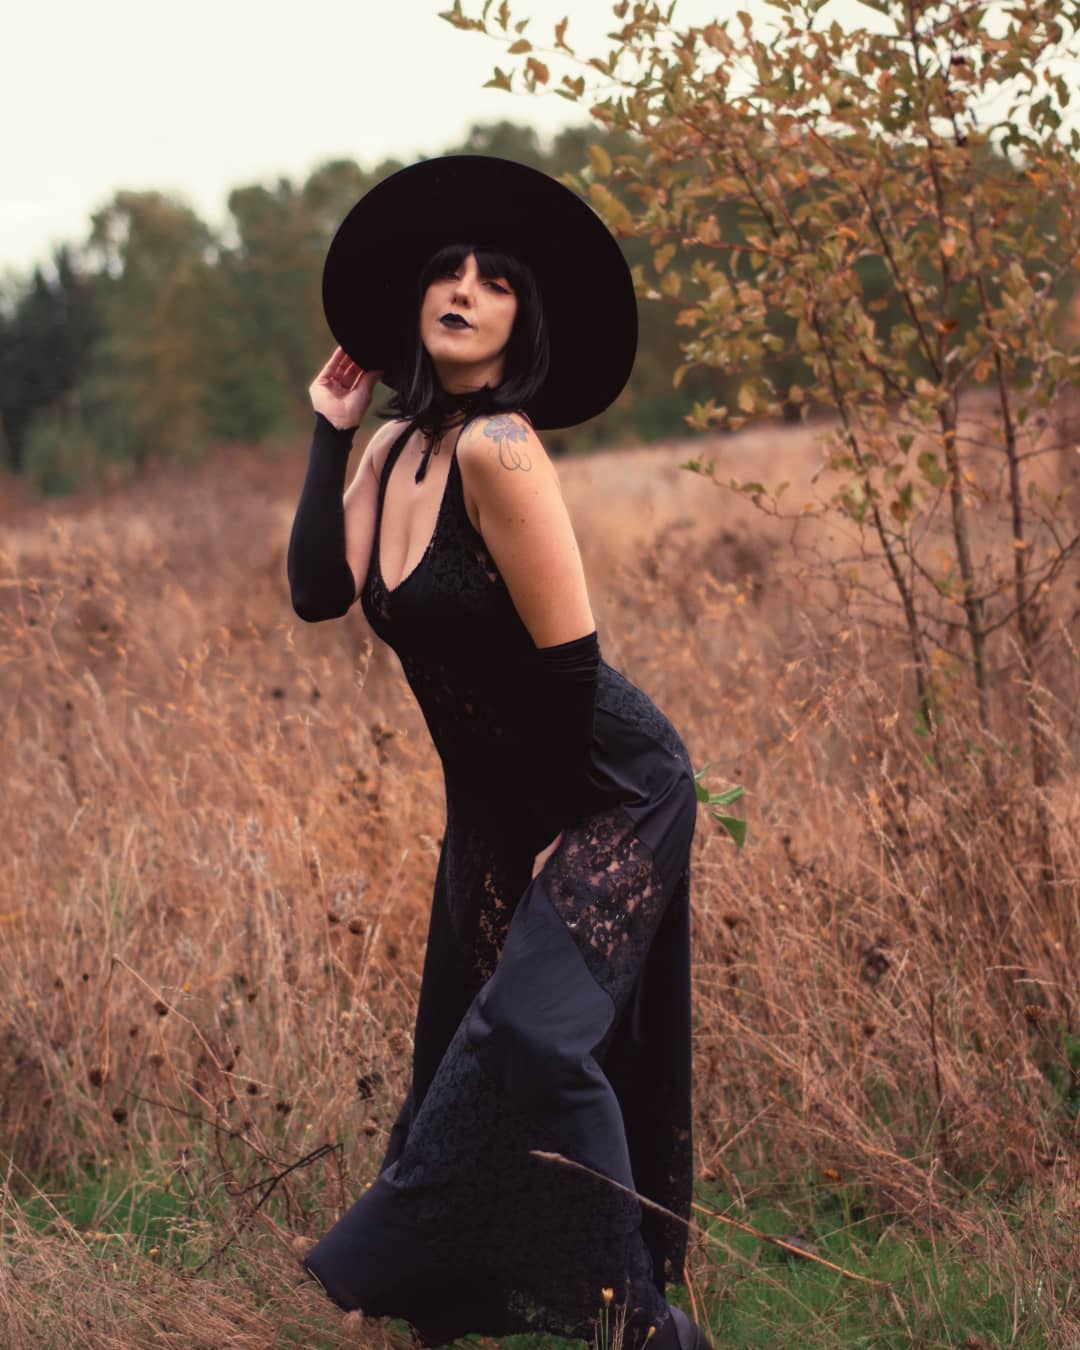 Check out my recent Halloween photoshoot!! 
Make sure to follow like comment & share plz 🥺😍

Photographer📸: @jaybayphotography 

#witch #witchesofinstagram #coven #gothgirl #alternativegirl #alt #blackwig #shapeshifter #witchyvibes #halloweenphotoshoot #witchphotoshoot #darkphotography #modelsofinstagram #pnwmodel #oregonmodel #modelshoot #witchhat #hex #pentagram #modelart #lacedress #spookyseason #spoopy #spooky